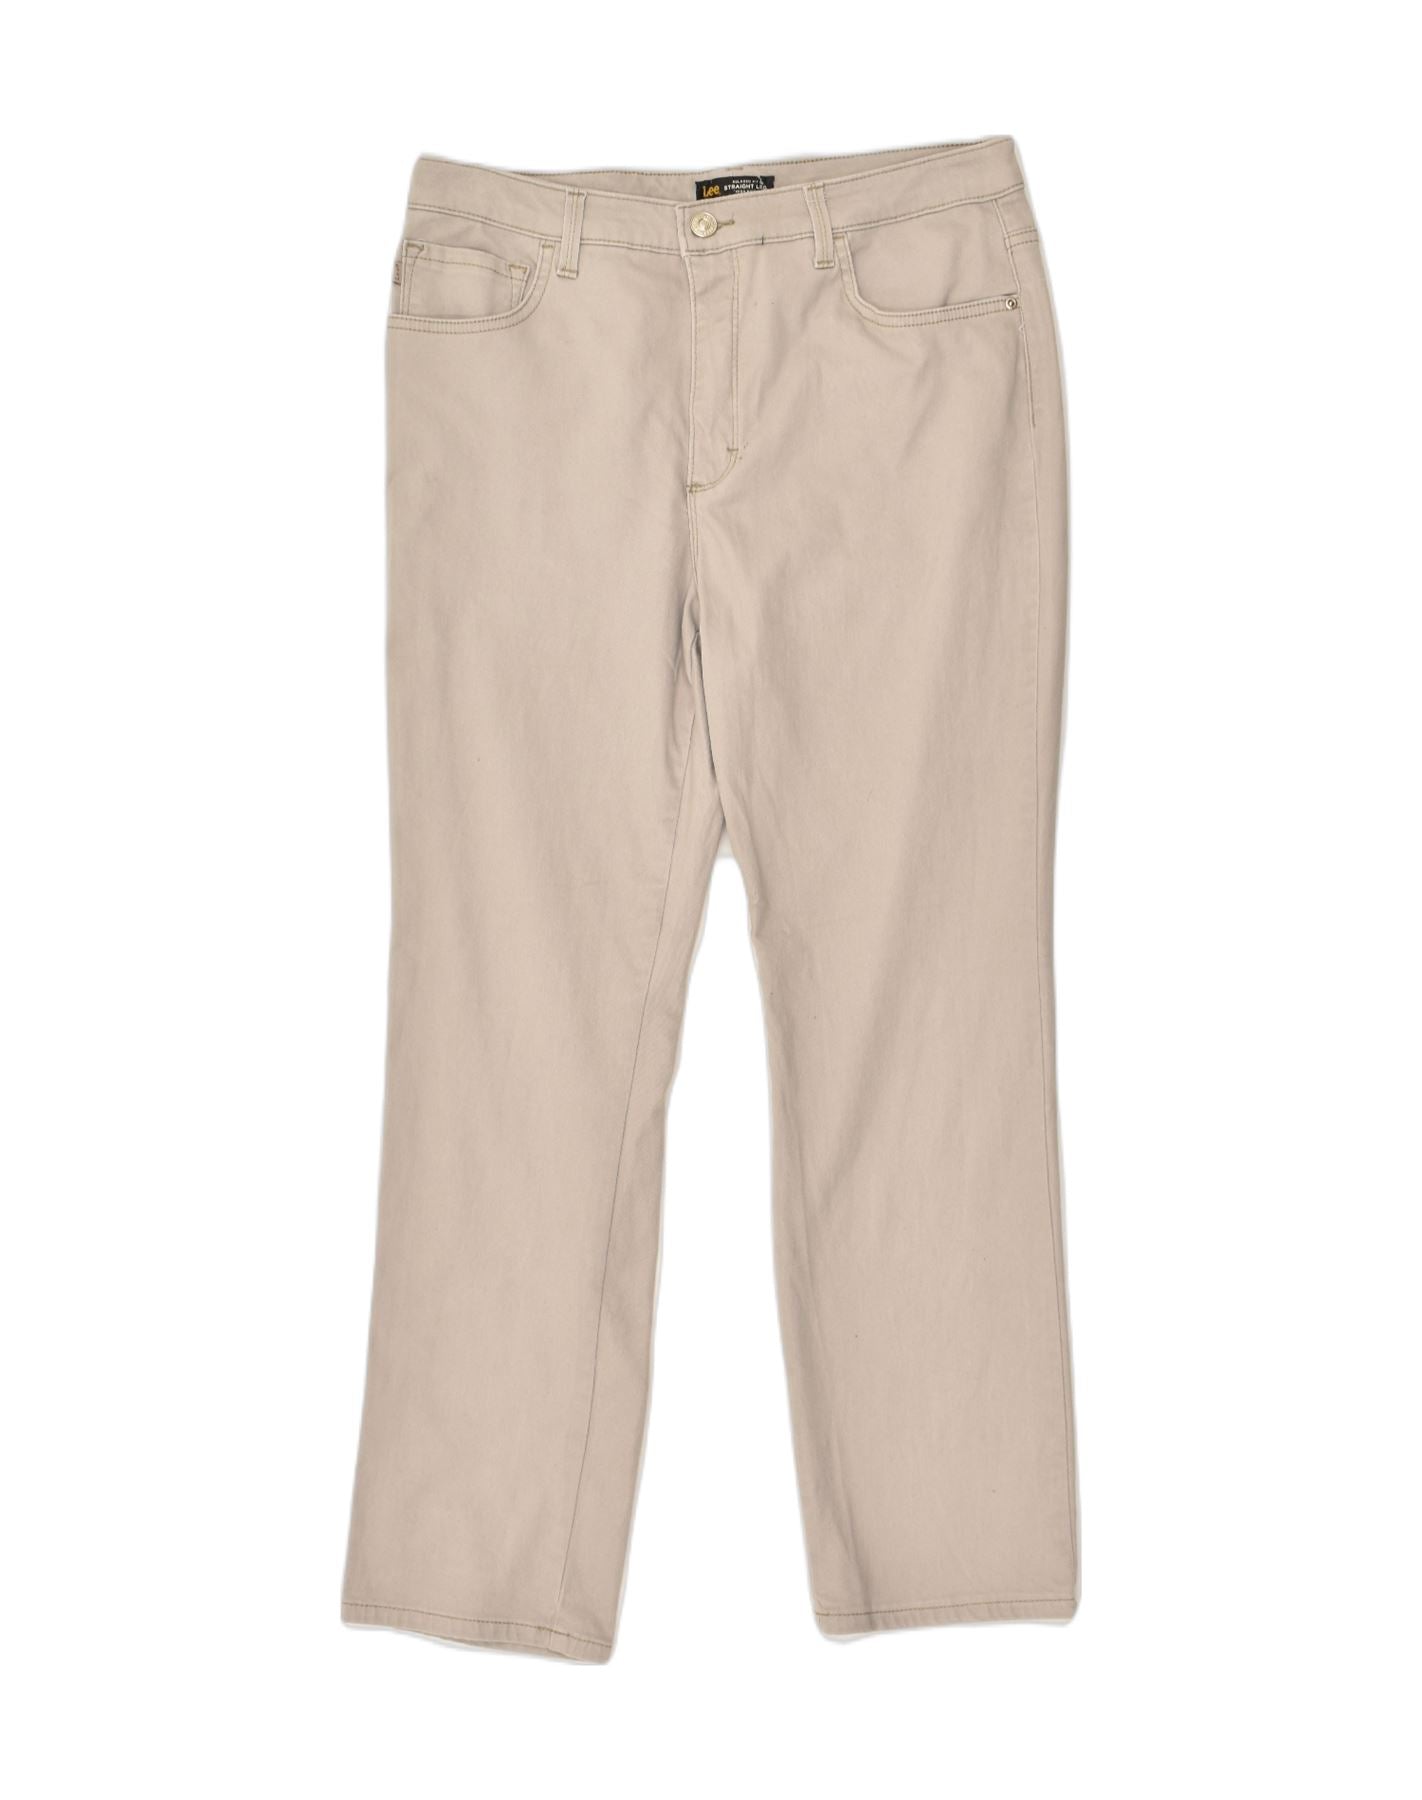 LEE Womens Relaxed Fit Casual Trousers US 14 XL W32 L29 Beige Cotton, Vintage & Second-Hand Clothing Online